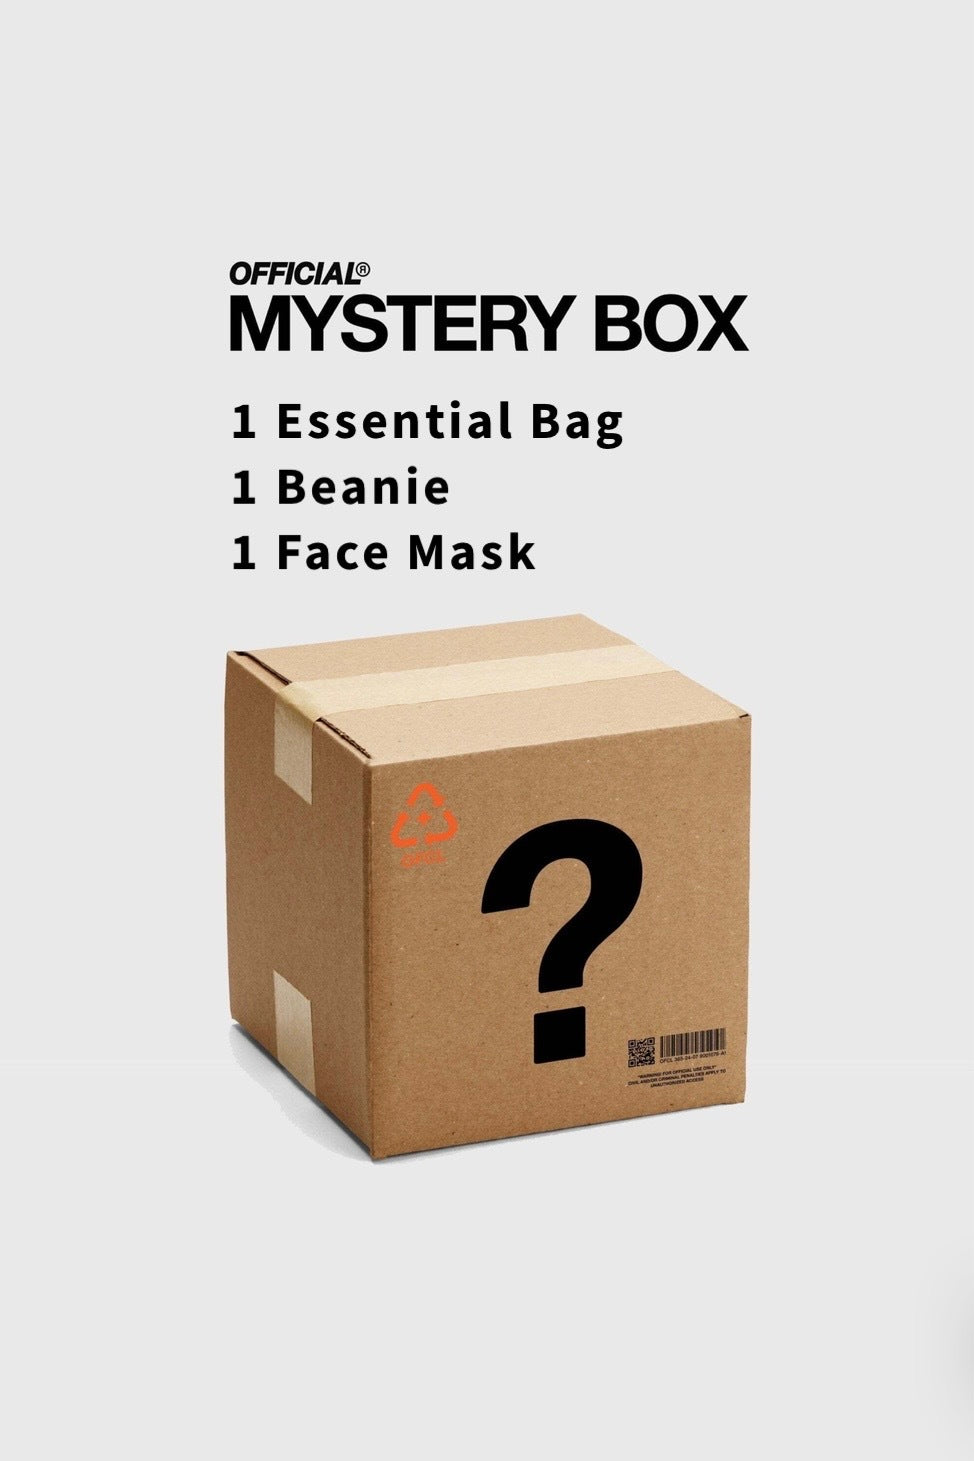 Mysterious Box of Mystery #1